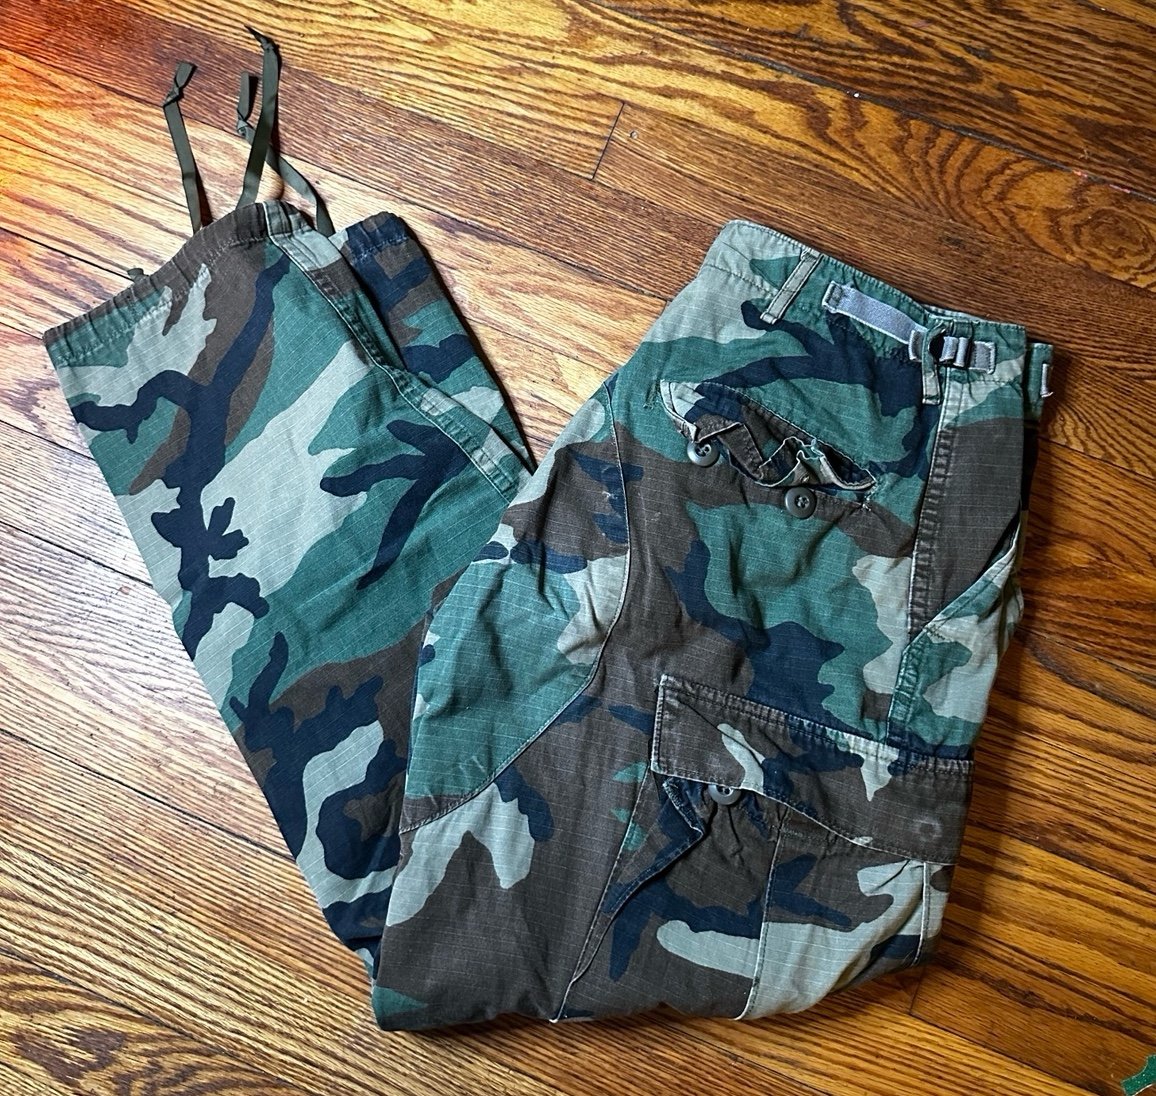 Fashion Military Pants Camo oXRKf98m8 Factory Price